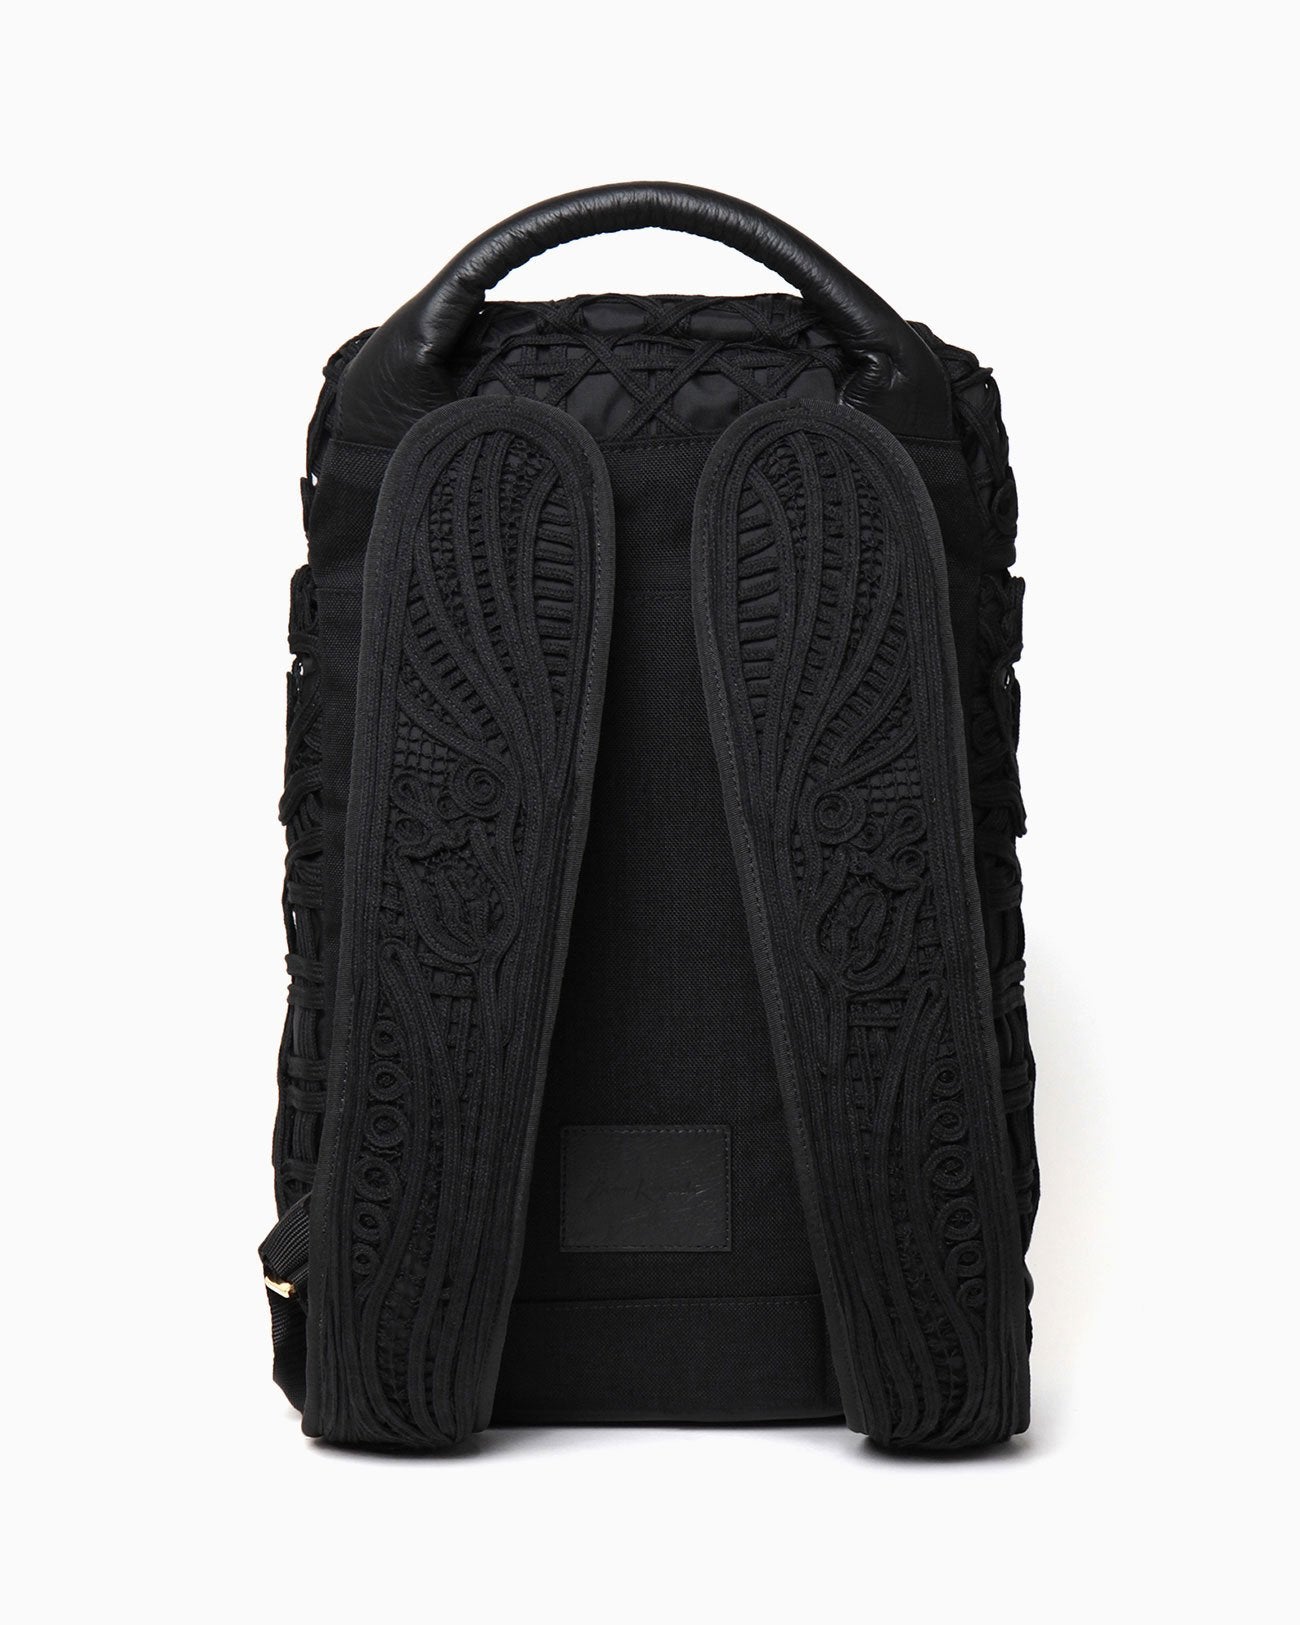 Cording Embroidery Backpack - black